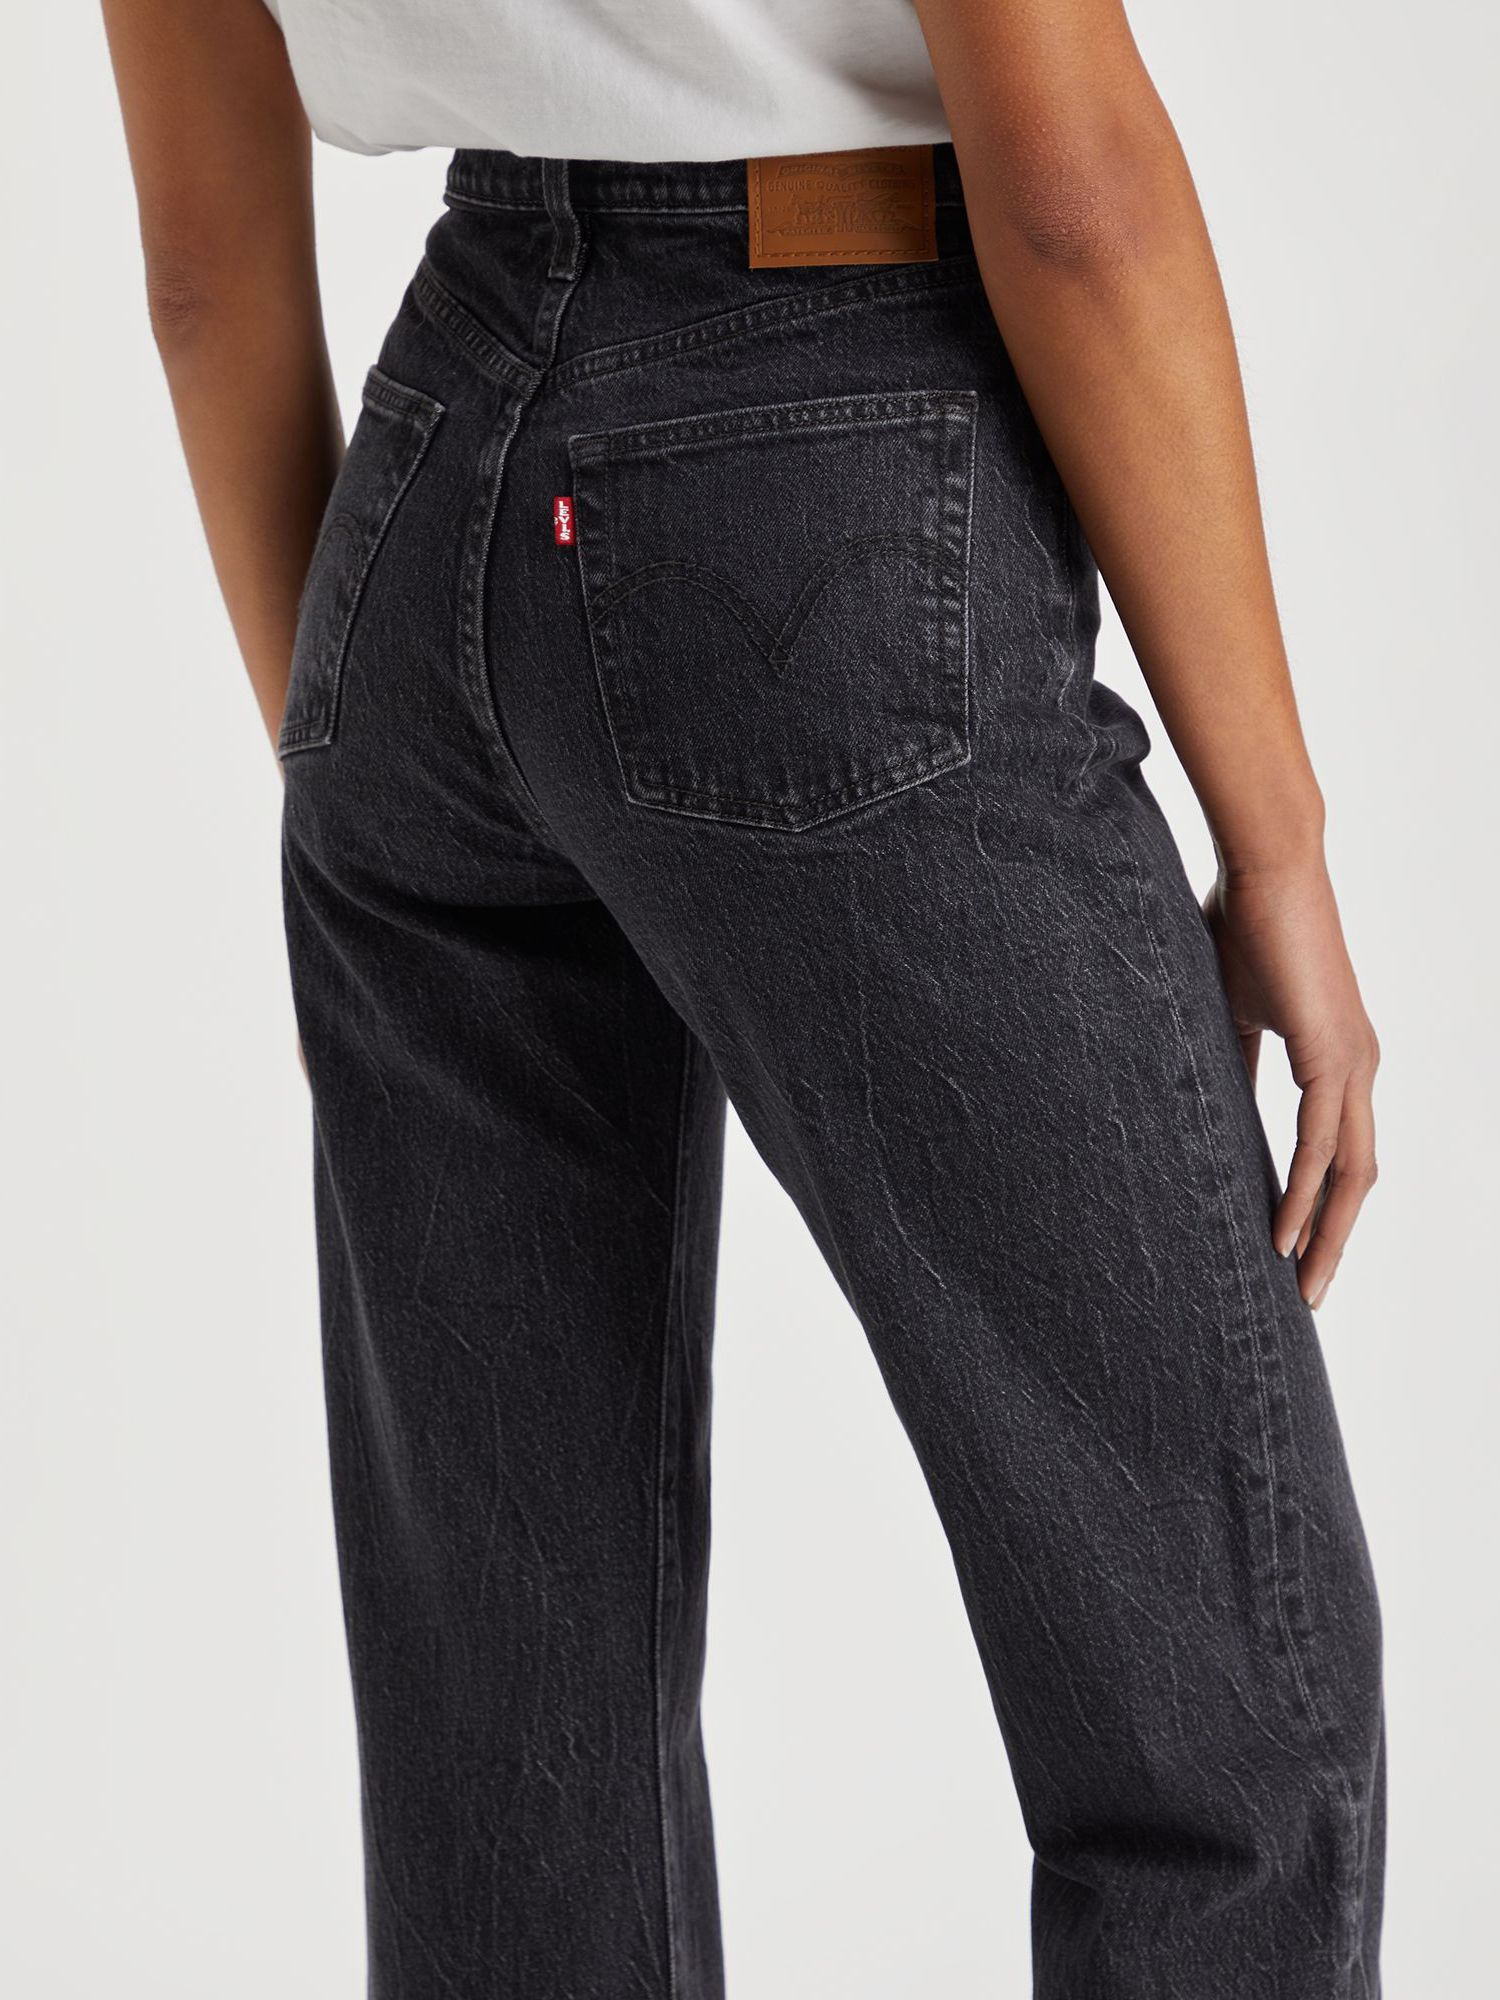 Levi's Ribcage Straight Cut Cropped Jeans, Soda Spring at John Lewis ...